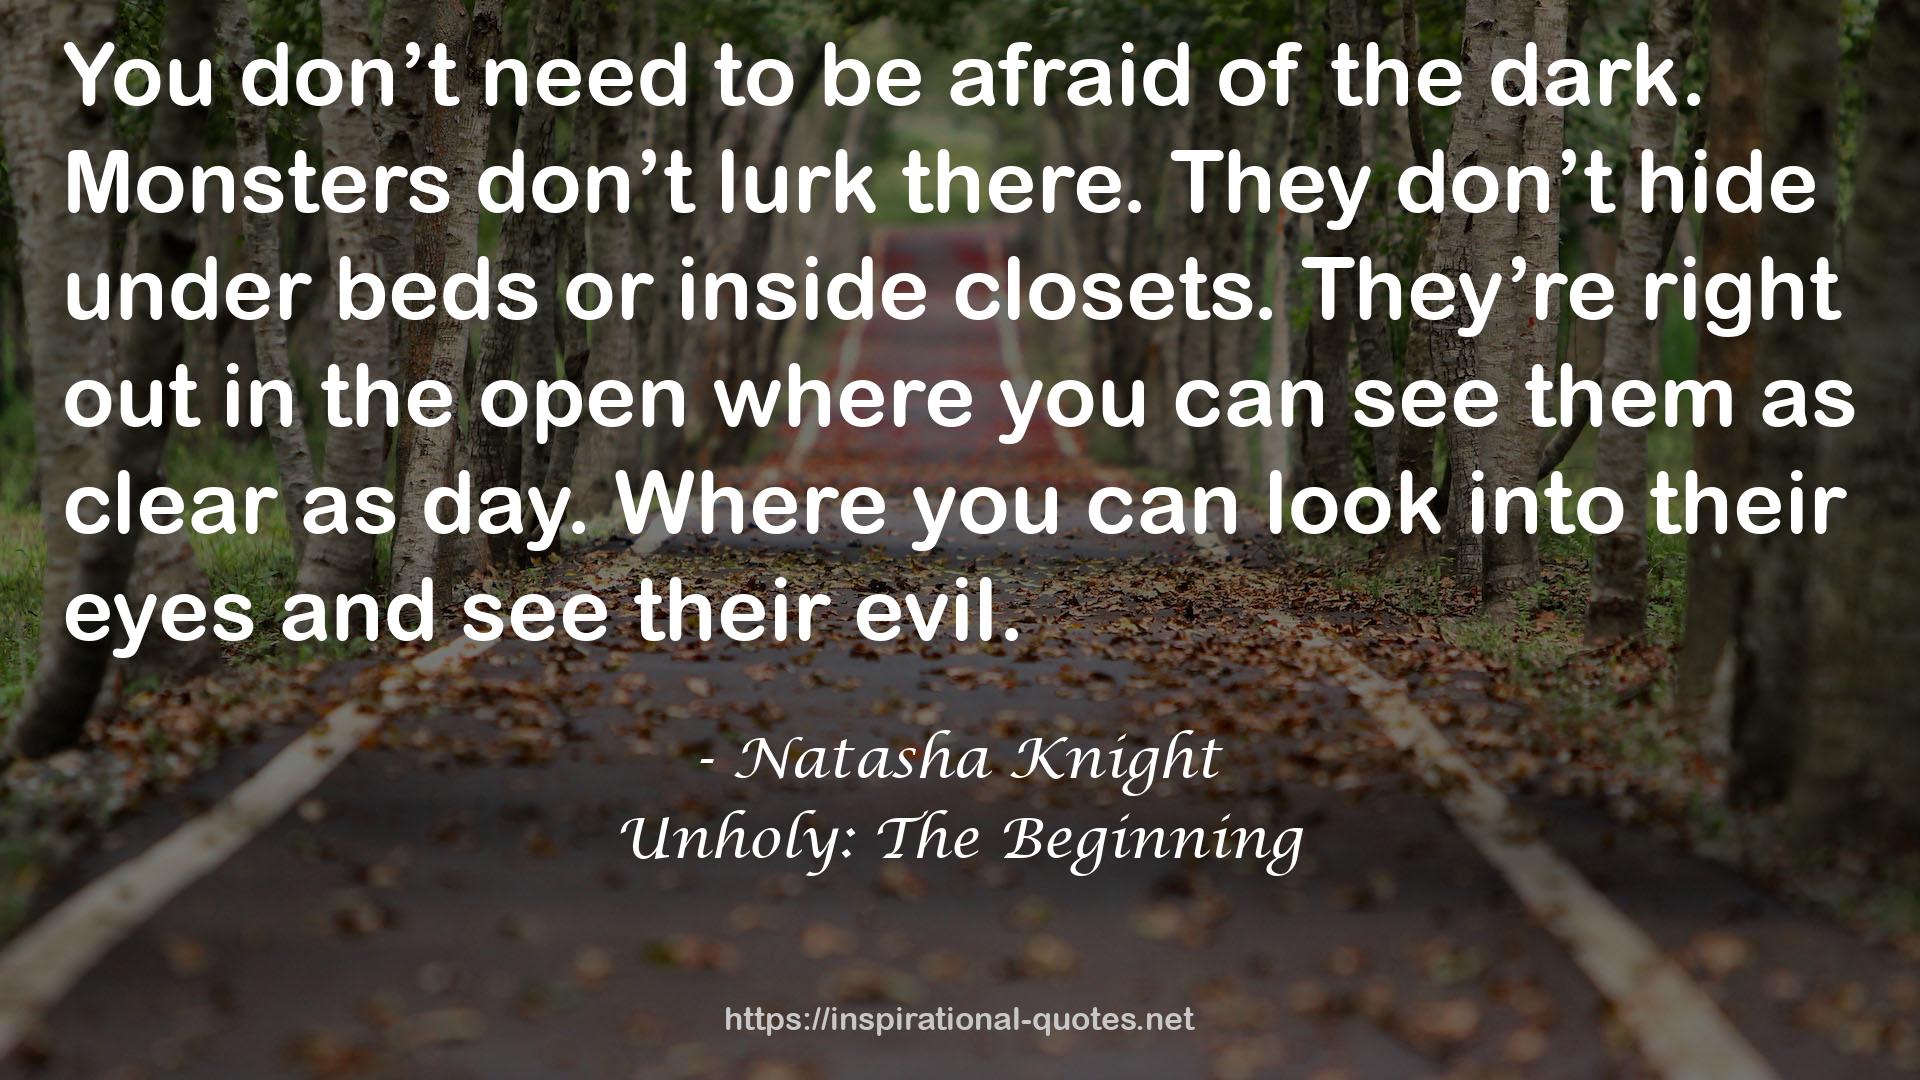 Unholy: The Beginning QUOTES